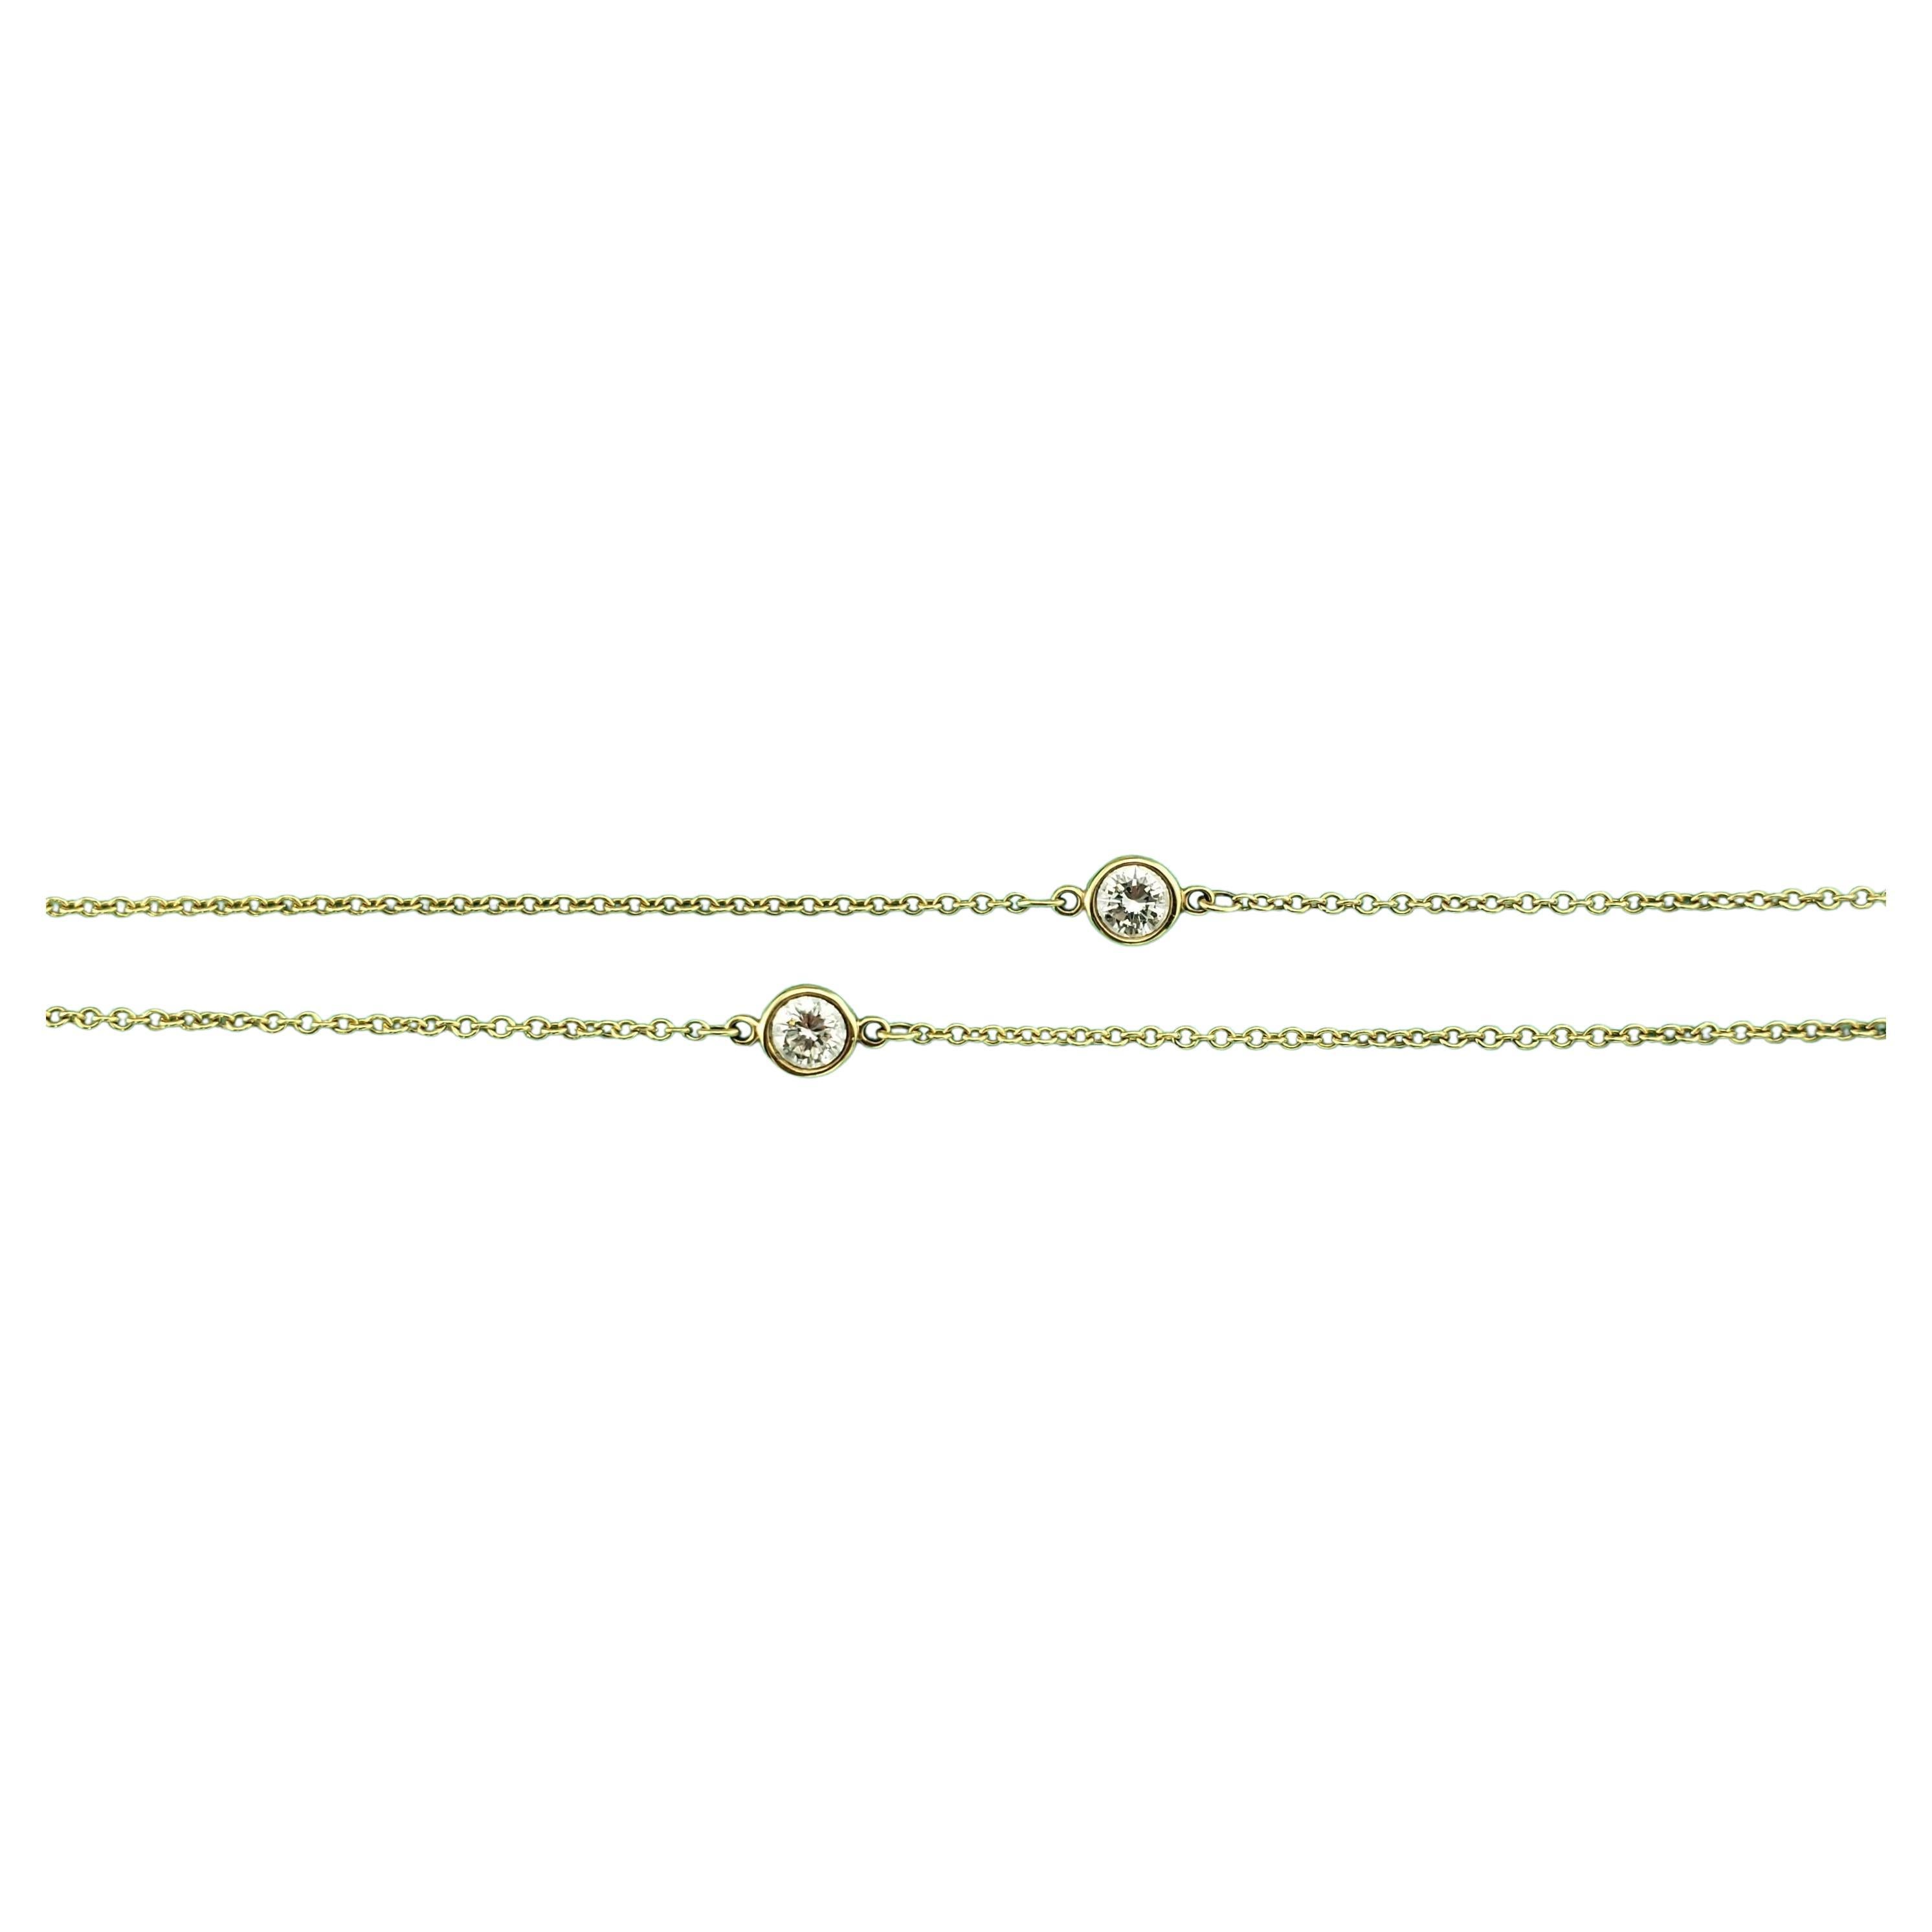 Tiffany & Co. Elsa Peretti 18K Yellow Gold Diamonds by the Yard Necklace

This stunning station necklace features five round brilliant cut diamonds set in classic 18K yellow gold.  By Elsa Peretti for Tiffany & Co.

Approximate total diamond weight: